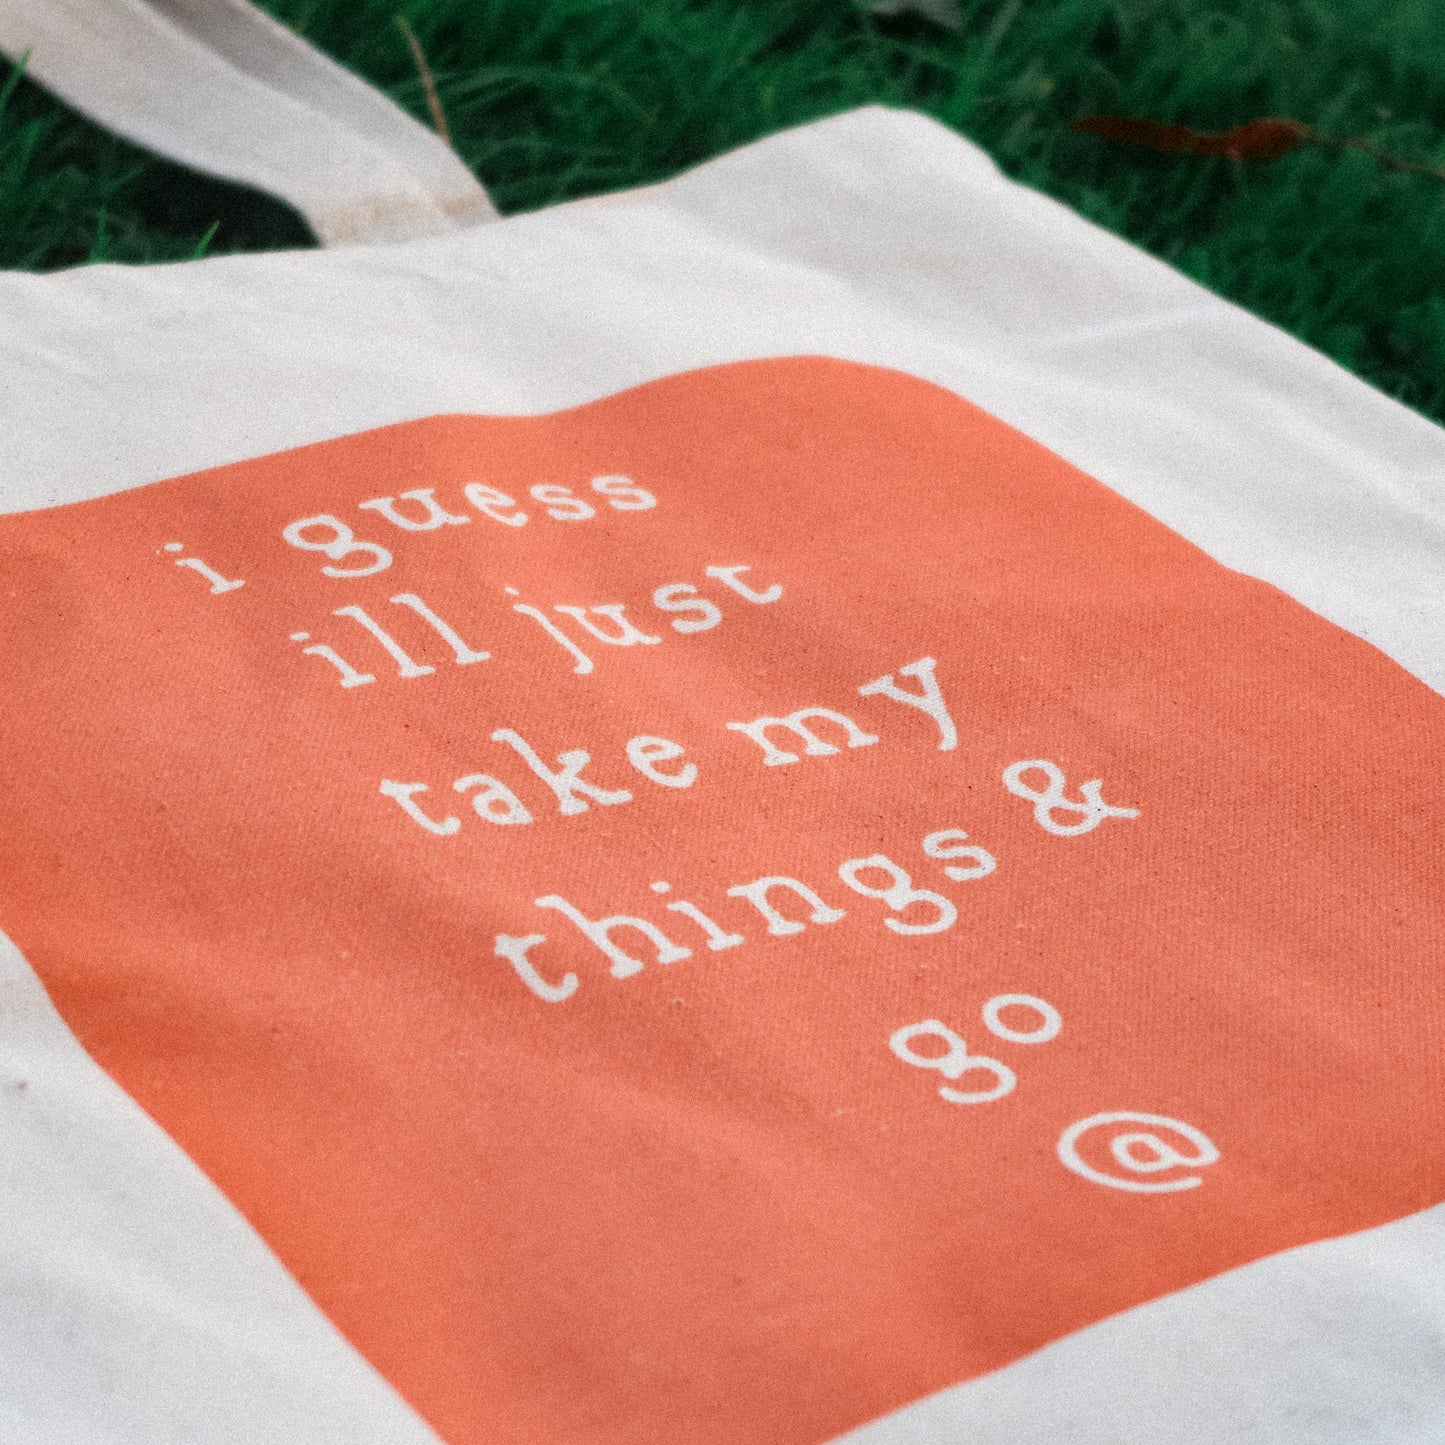 Annie Omalley: take my things & go tote